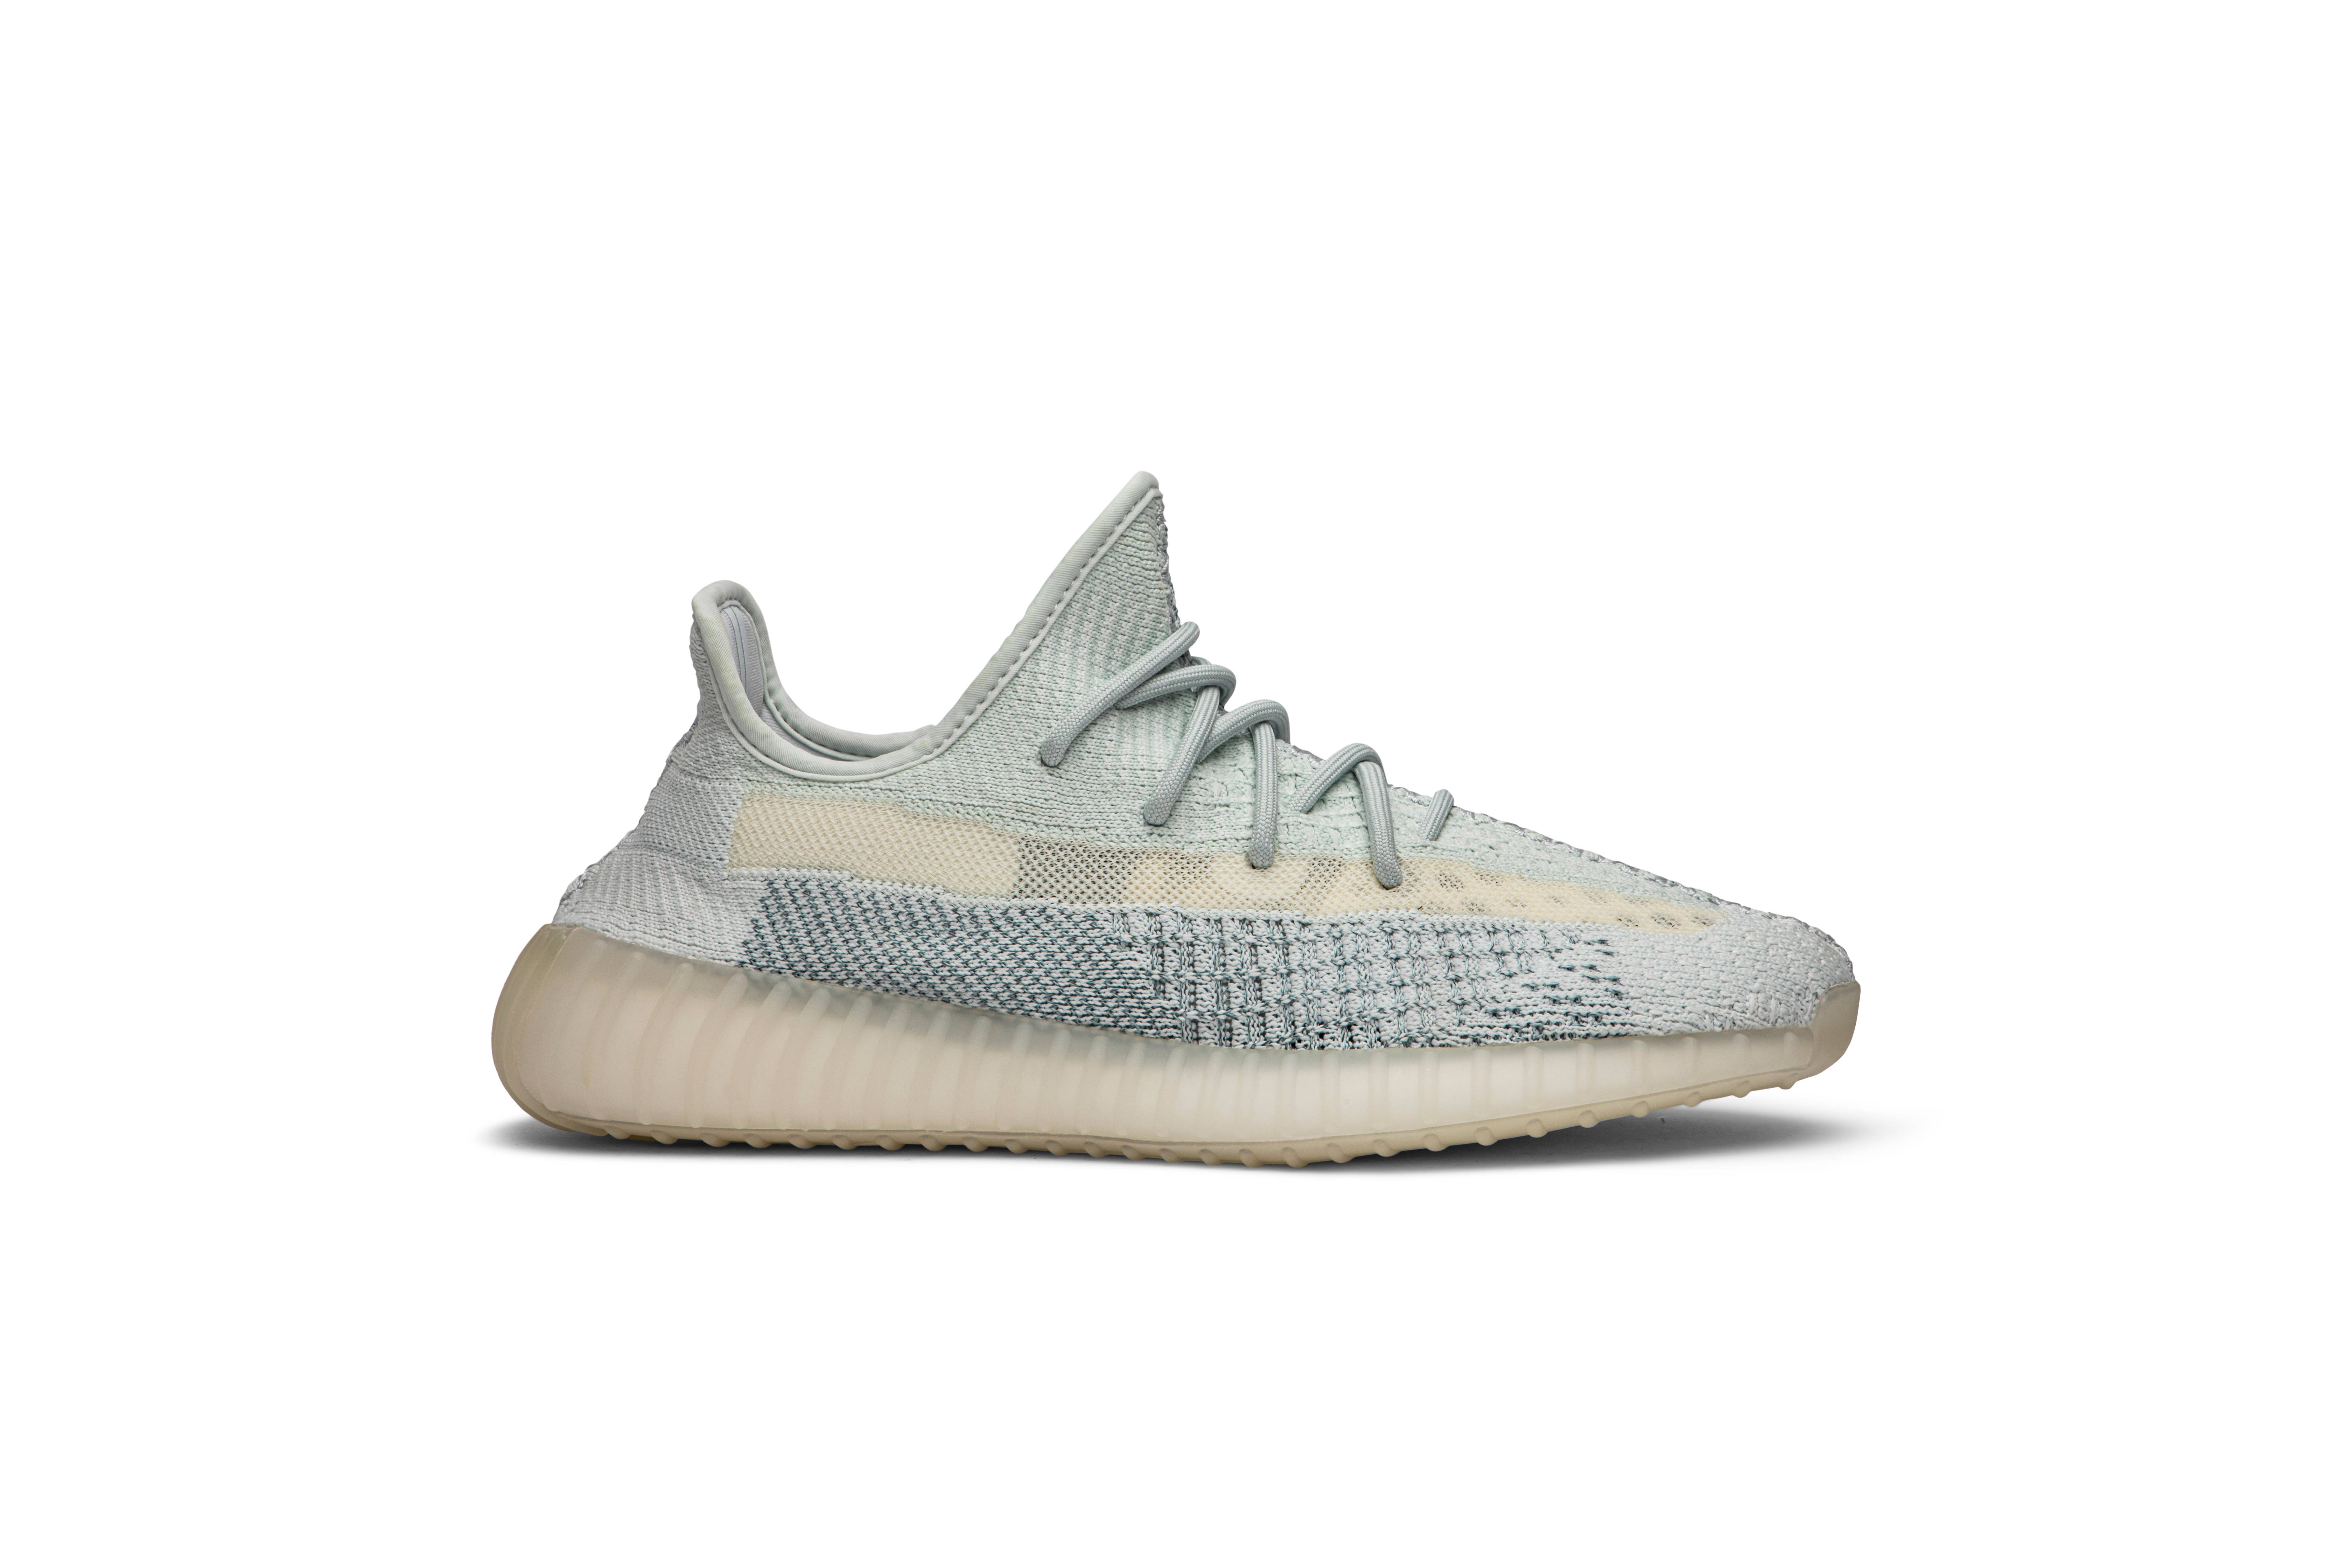 yeezy boost 350 v2 cloud white reflective release date